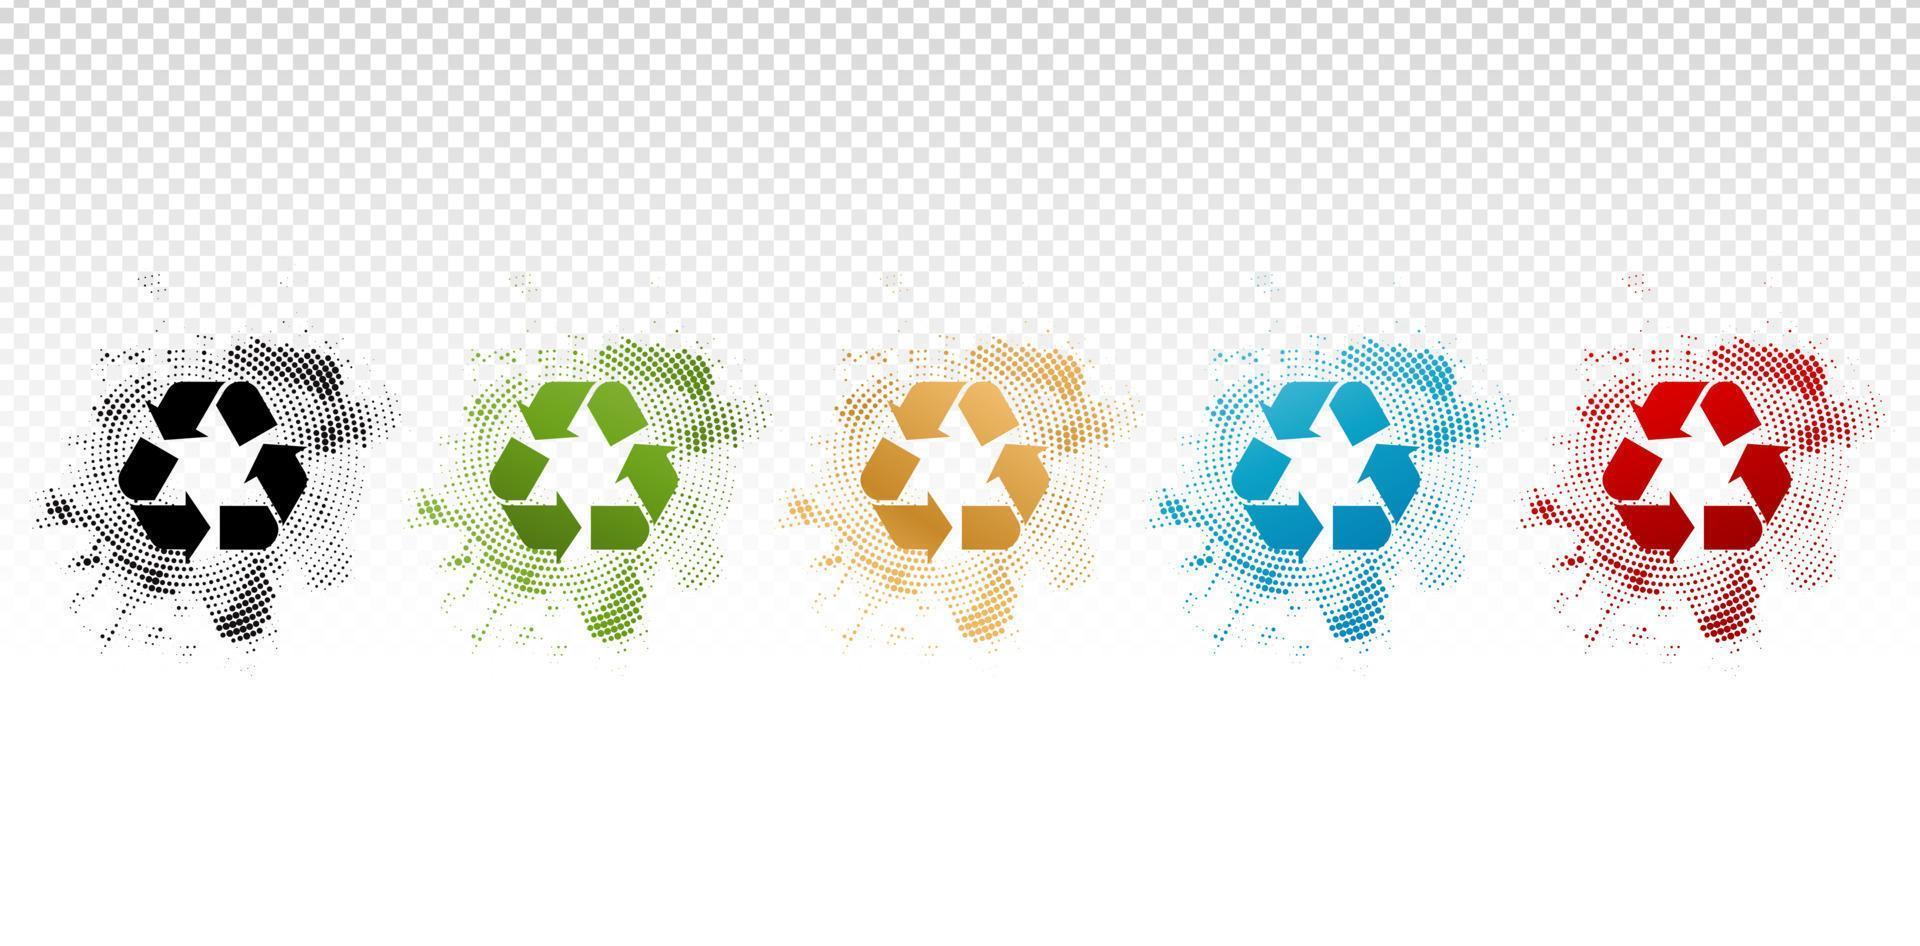 illustration of Recycle icon spread dots backgrounds label products company or corporate, User interface designs, collages, decks, Collaging and layouts, Website assets, Branding or identity campaigns vector